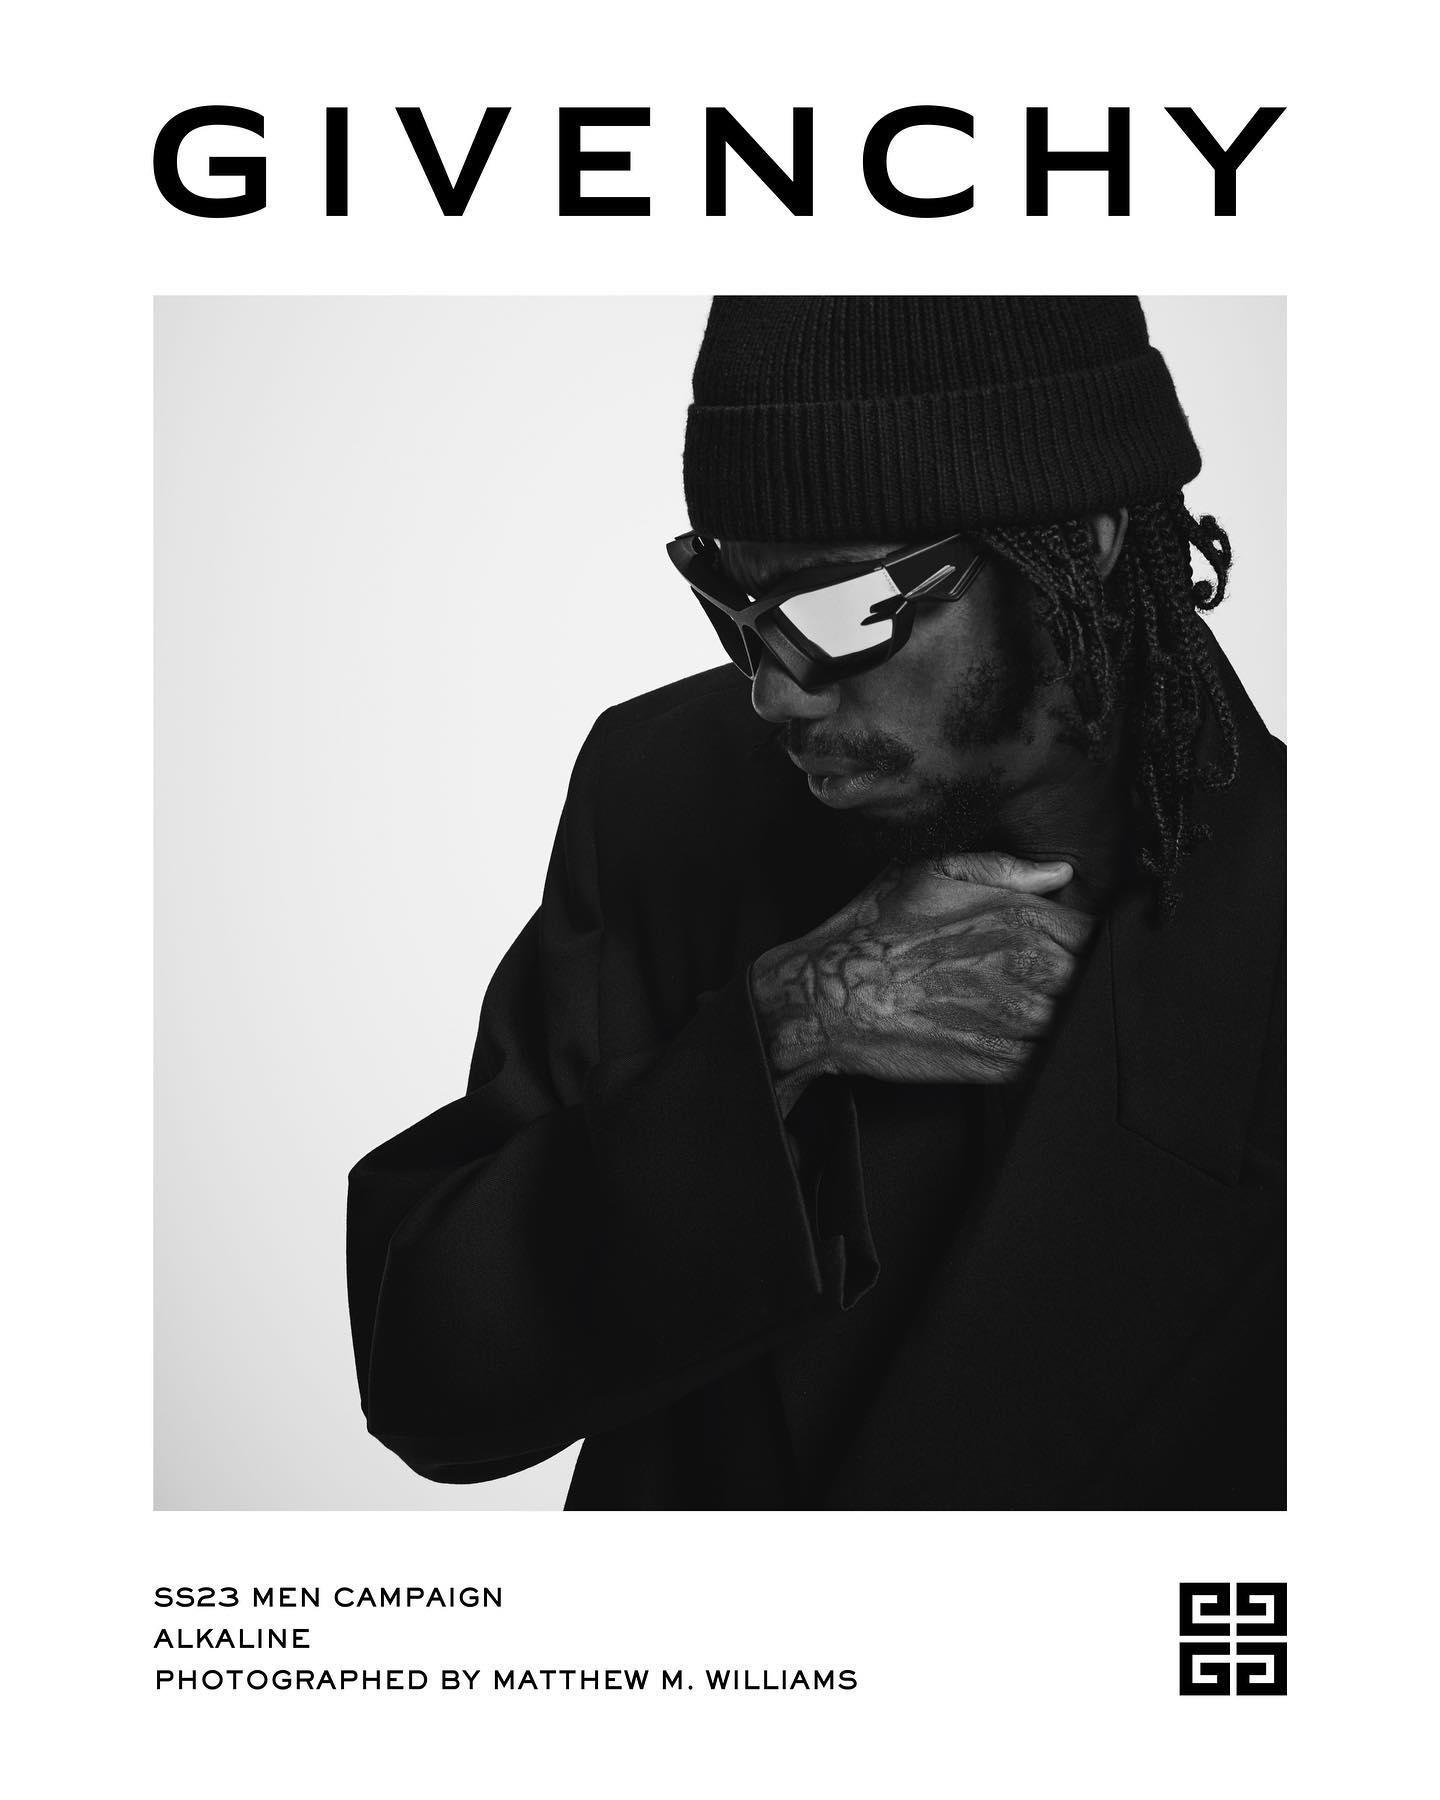 image  1 GIVENCHY - the #givenchyss23 men's global campaign by #matthewmwilliams featuring #manhimselff